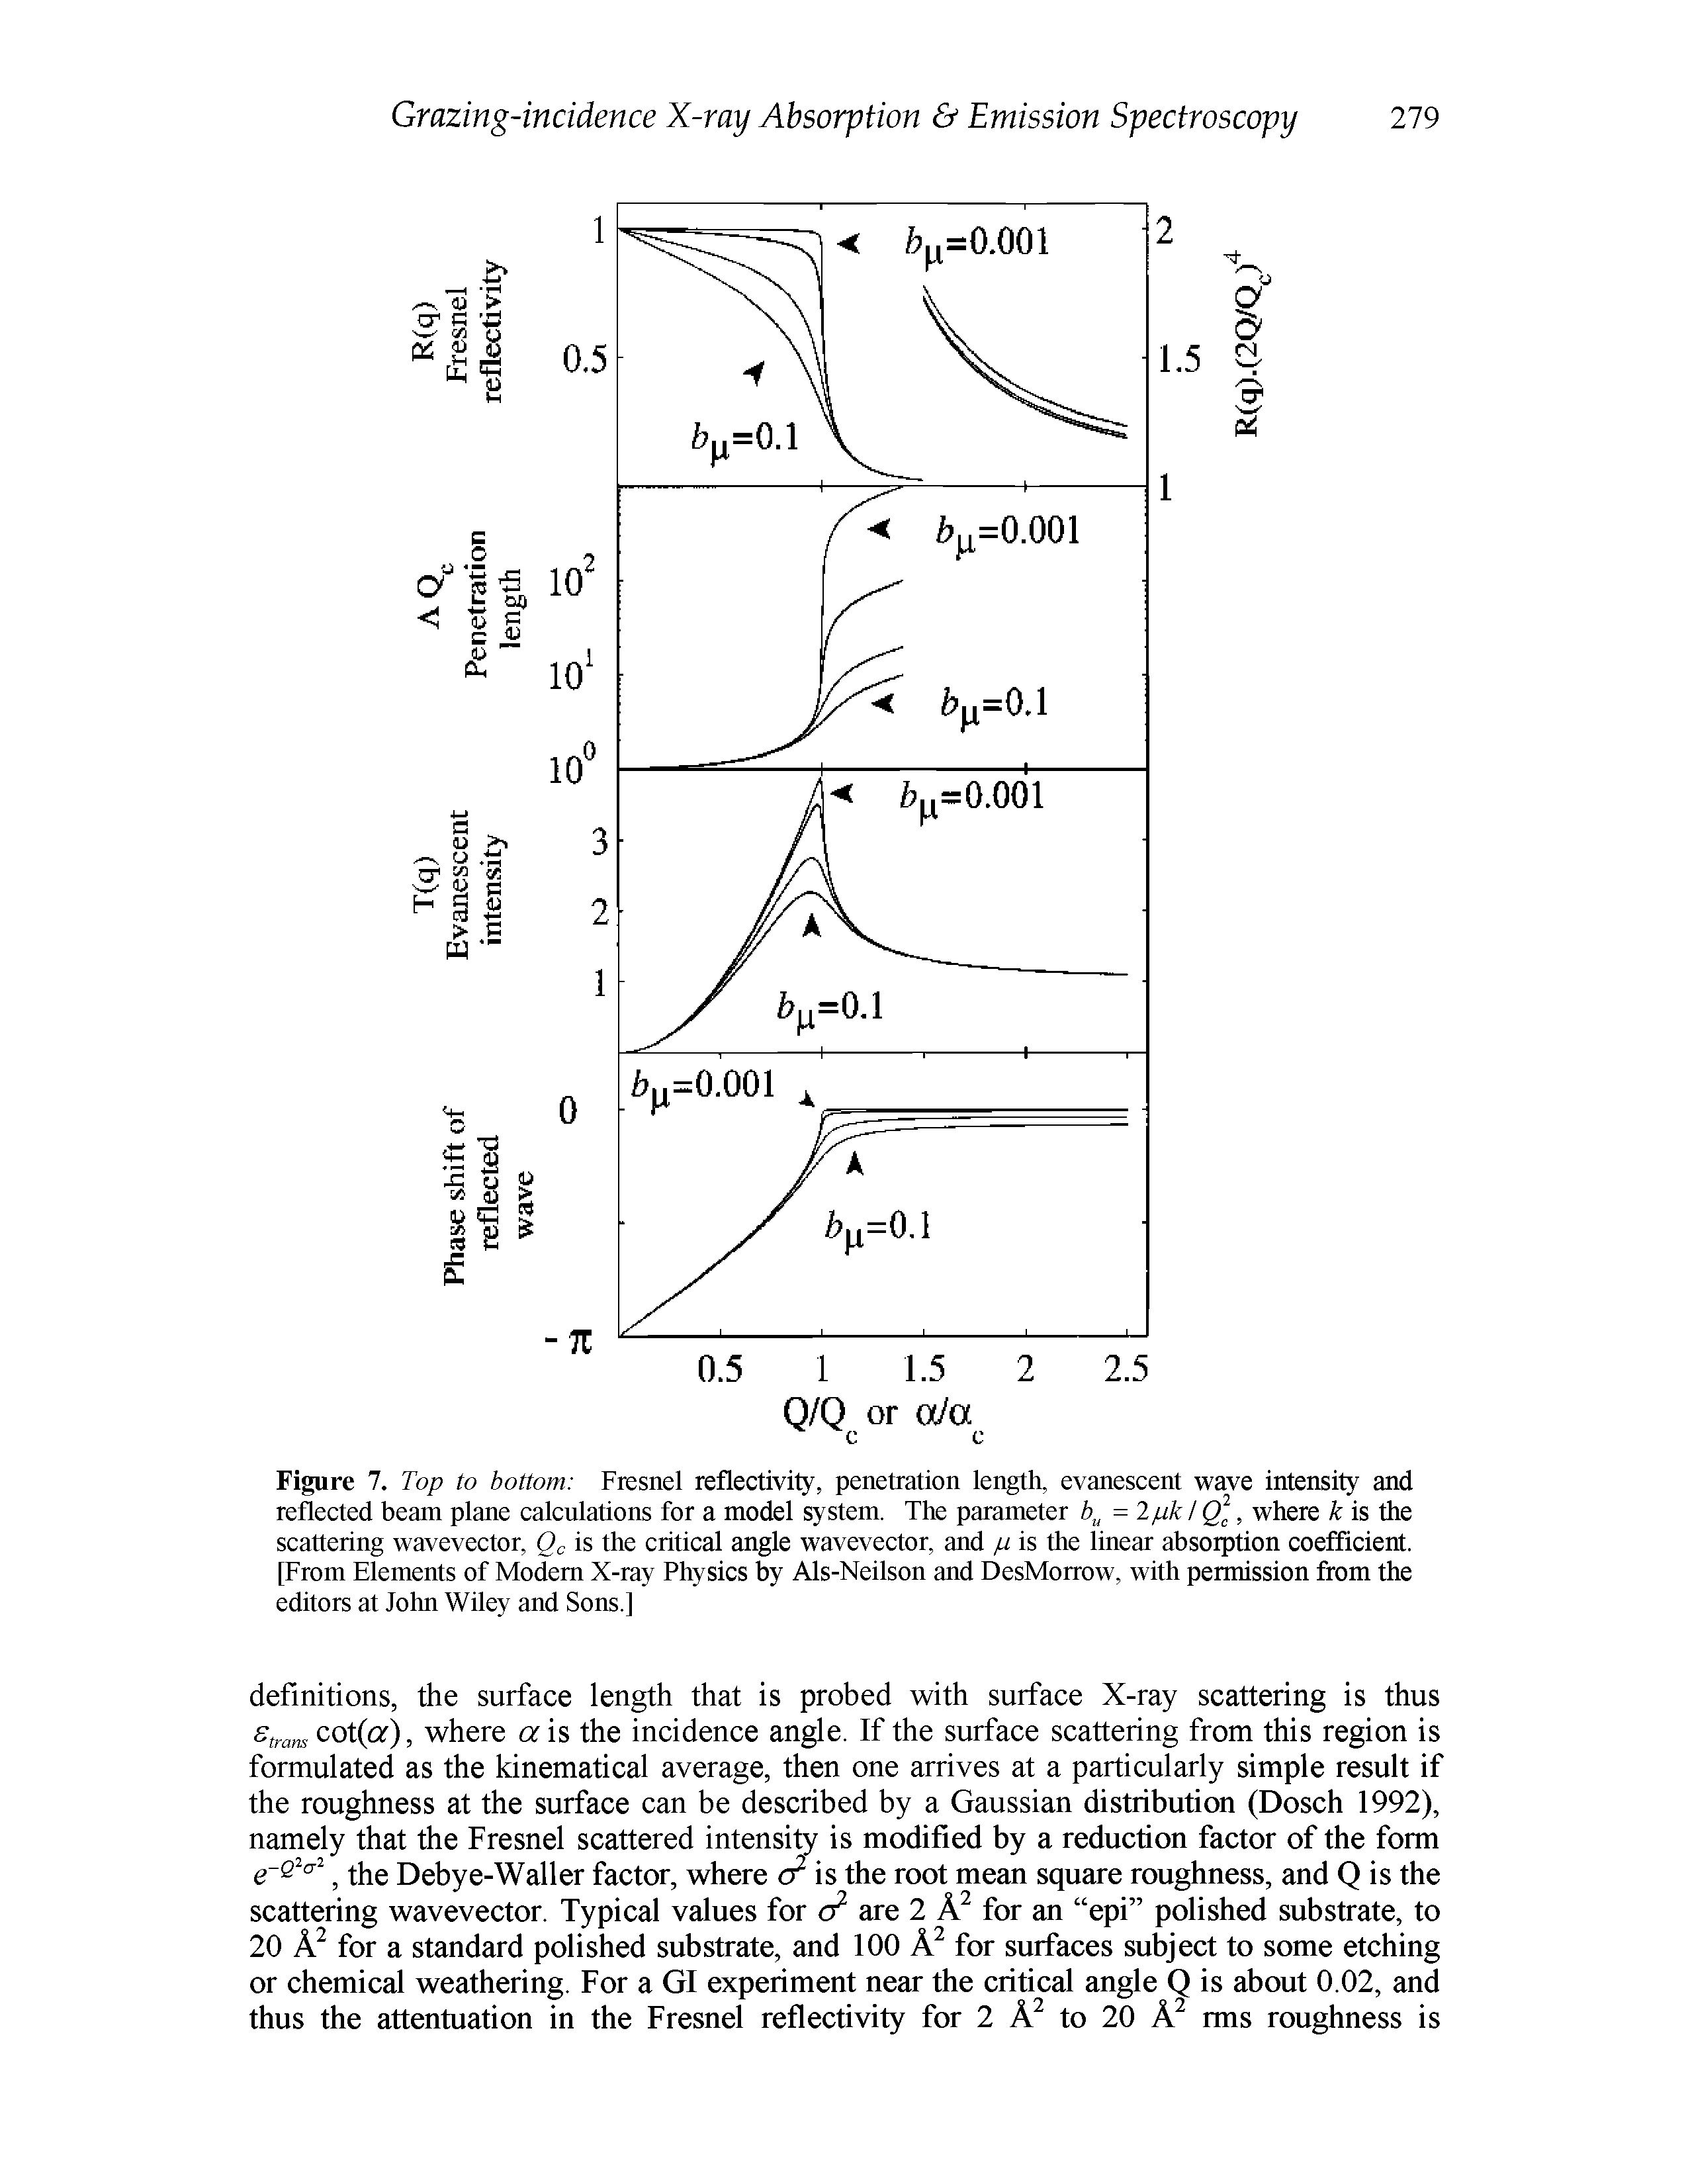 Figure 7. Top to bottom Fresnel reflectivity, penetration length, evanescent wave intensity and reflected beam plane calculations for a model system. The parameter bu = 2/uk i Q], where is the scattering wavevector, Qc is the critical angle wavevector, and p is the linear absorption coefficient. [From Elements of Modem X-ray Physics by Als-Neilson and DesMorrow, with permission from the editors at John Wiley and Sons.]...